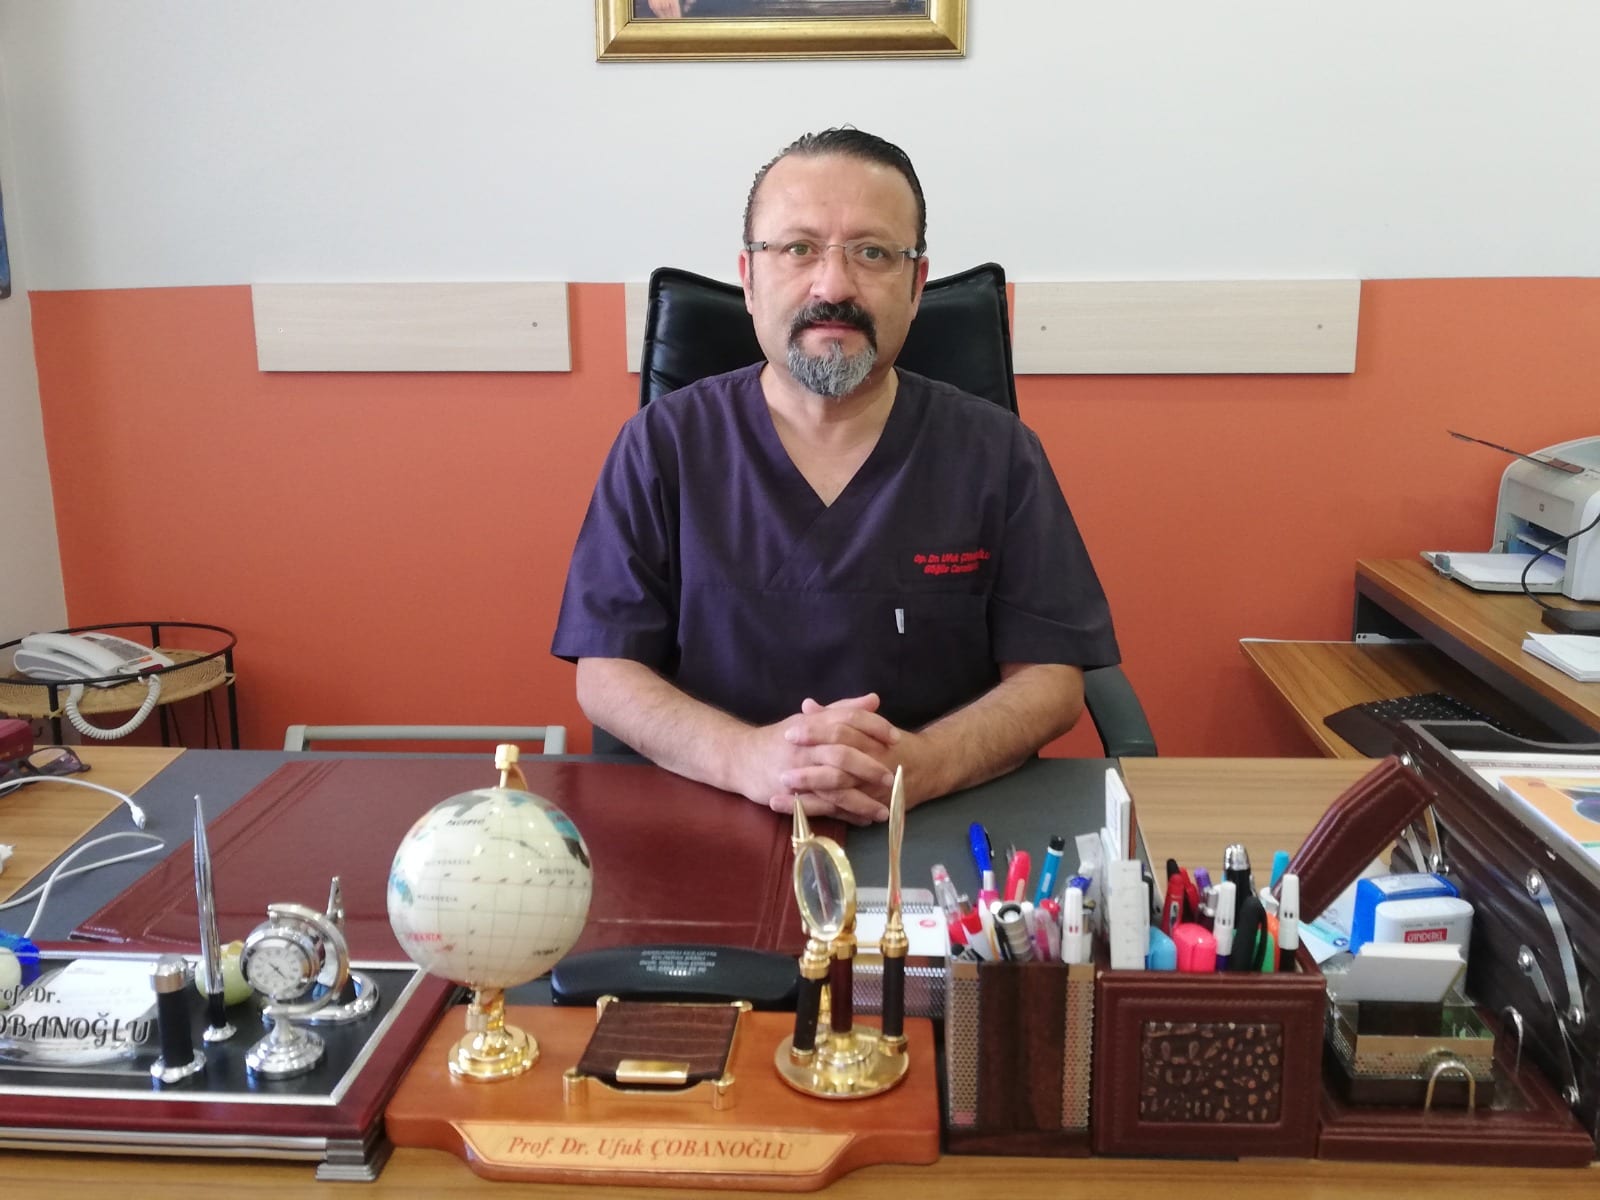 Turkish doctor back on duty after beating COVID-19